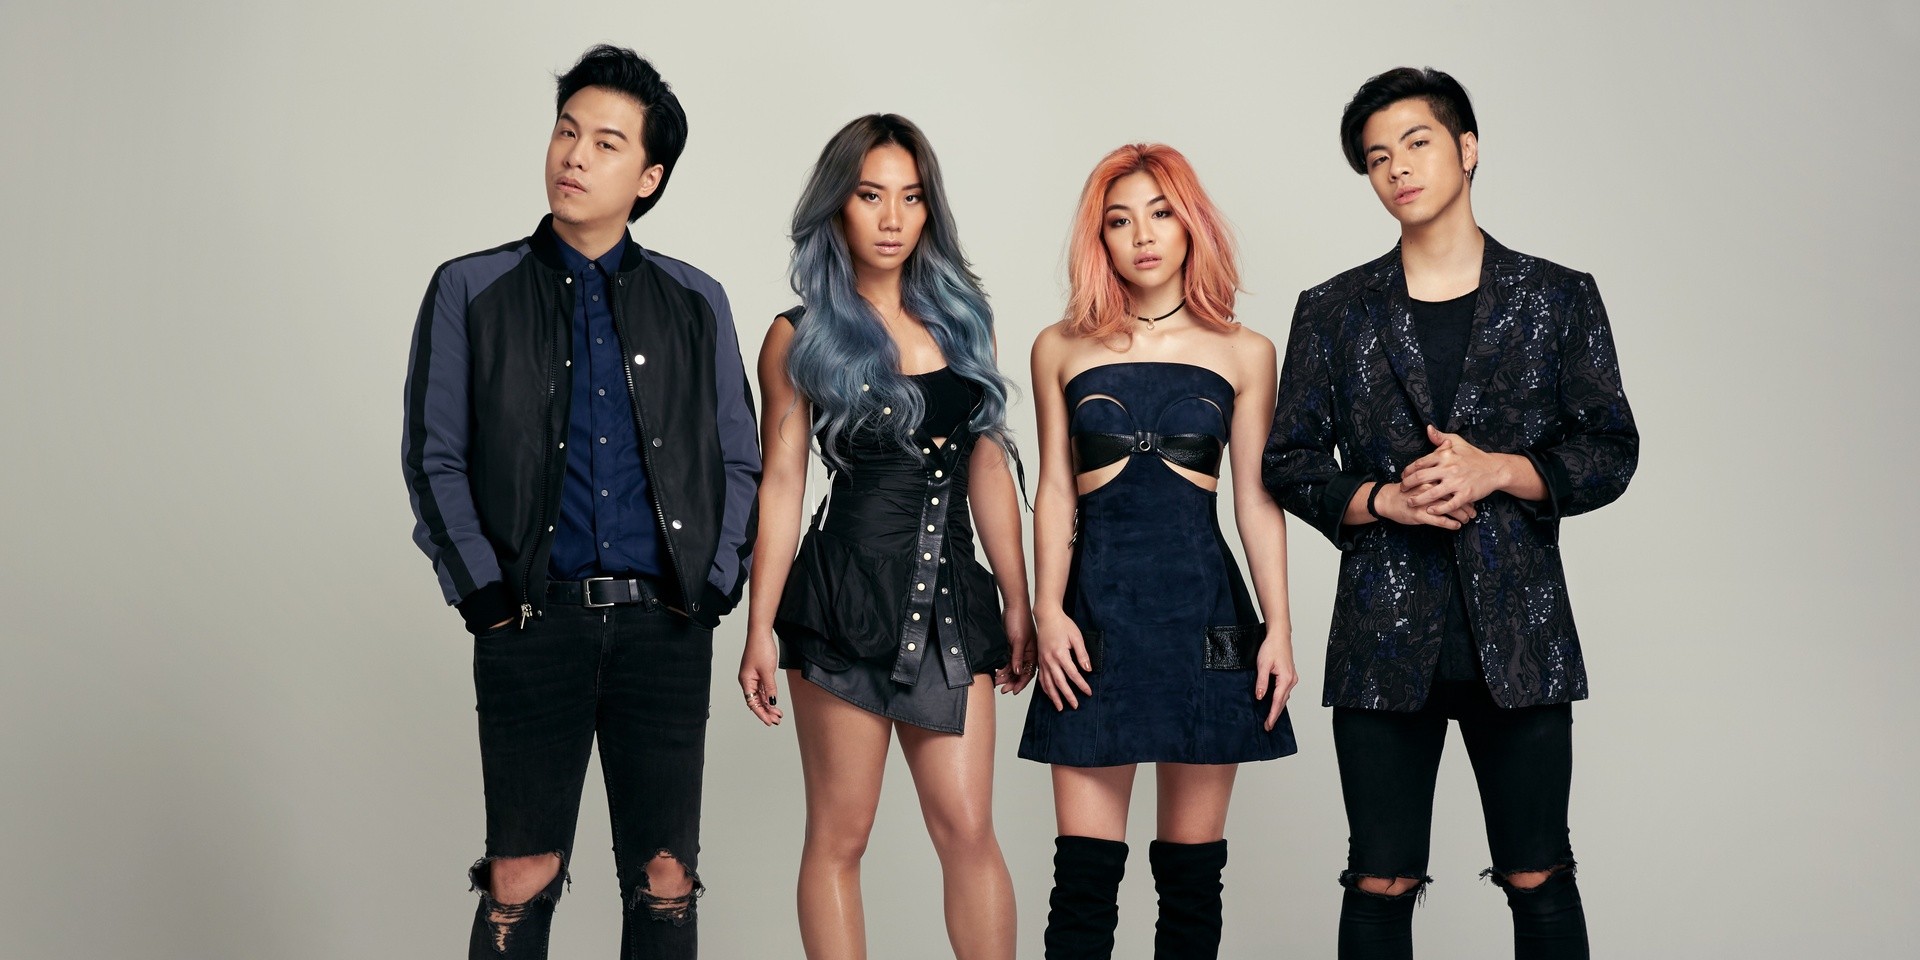 The Sam Willows release two new singles, 'Robot' & 'Papa Money' – listen